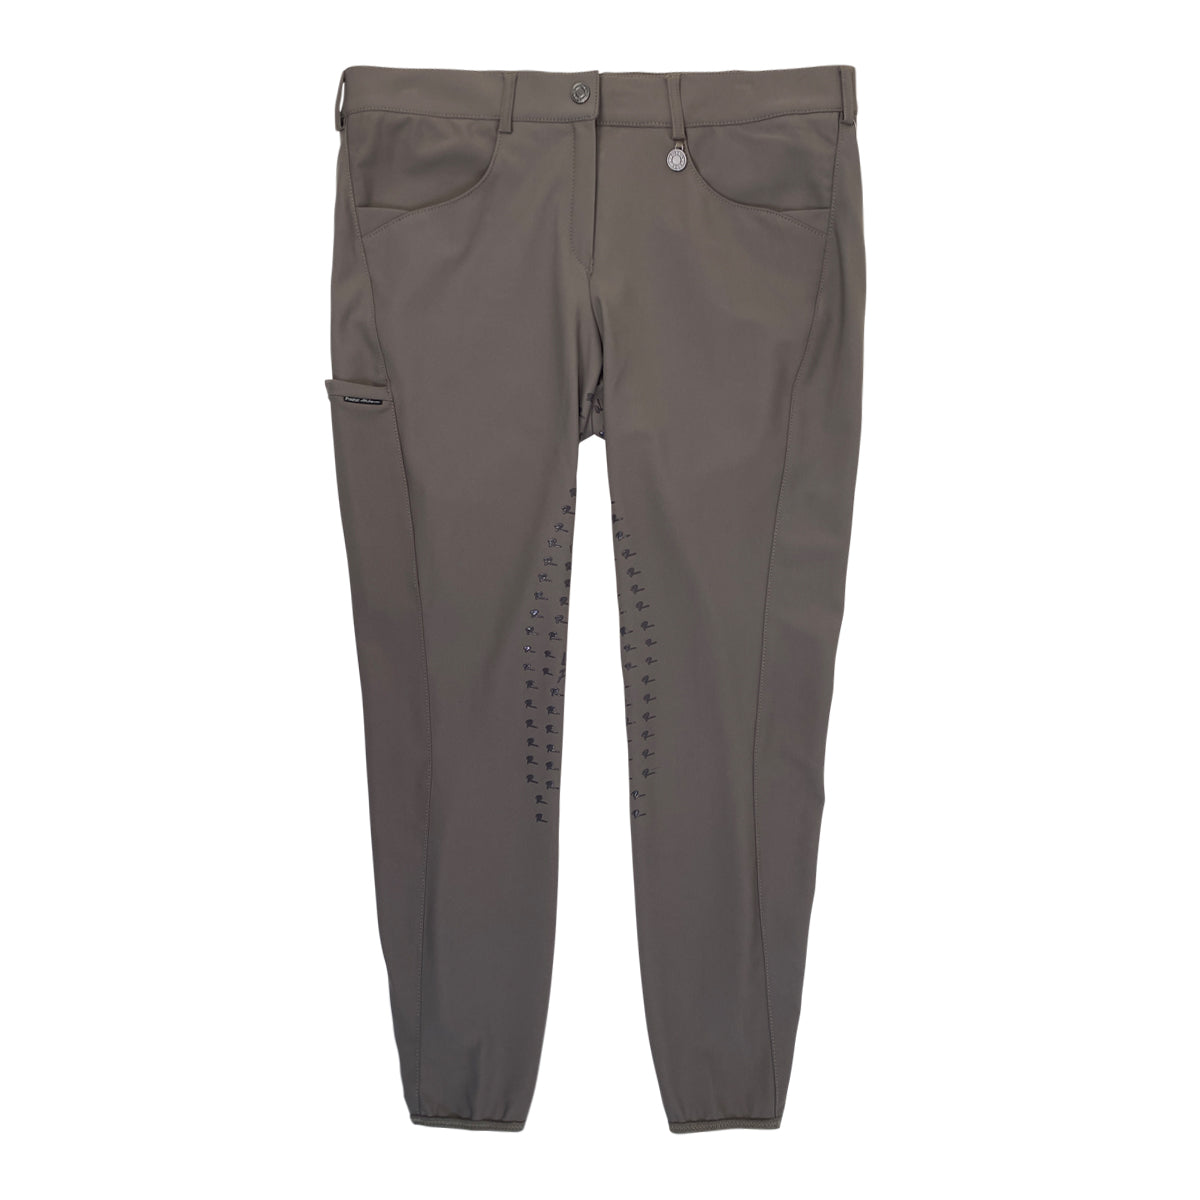 Pikeur 'Olivia Athleisure' Breech in Taupe